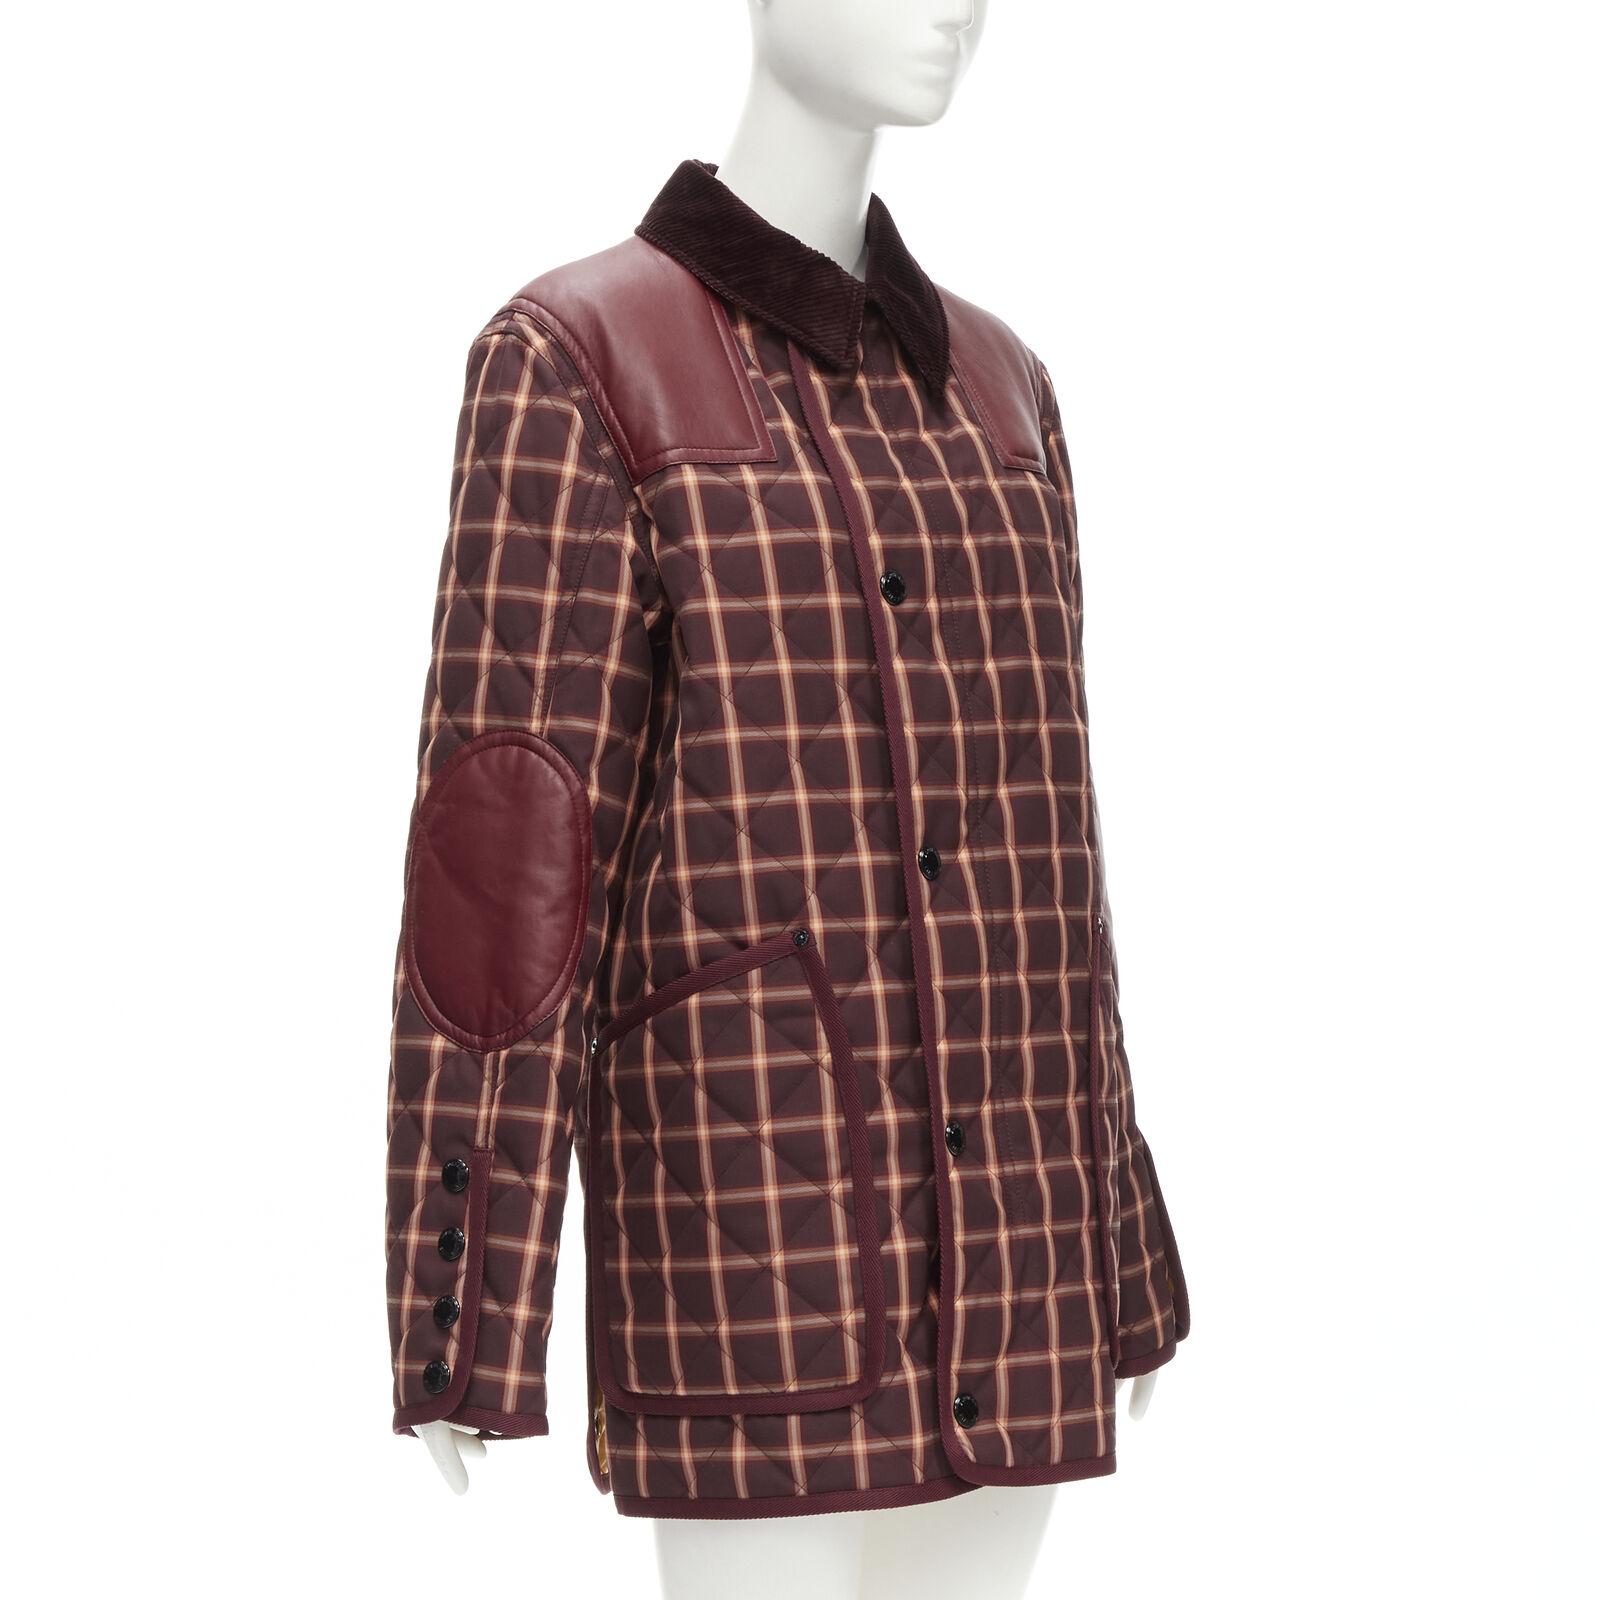 Black new BURBERRY RICCARDO TISCI Reversible Burgundy Check leather patch jacket XS For Sale